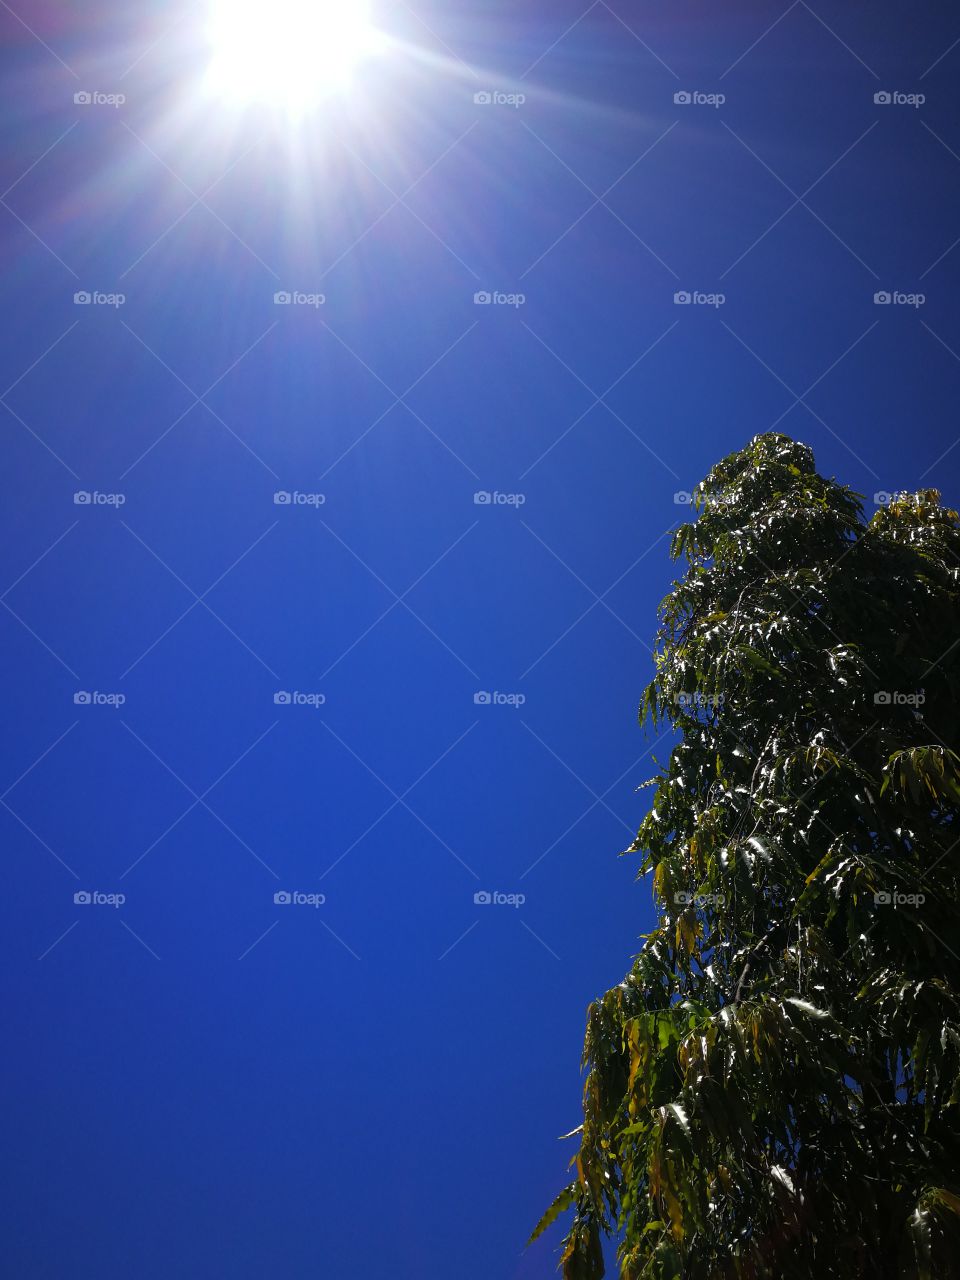 A view from below showing a tree, a sun and a clear blue sky